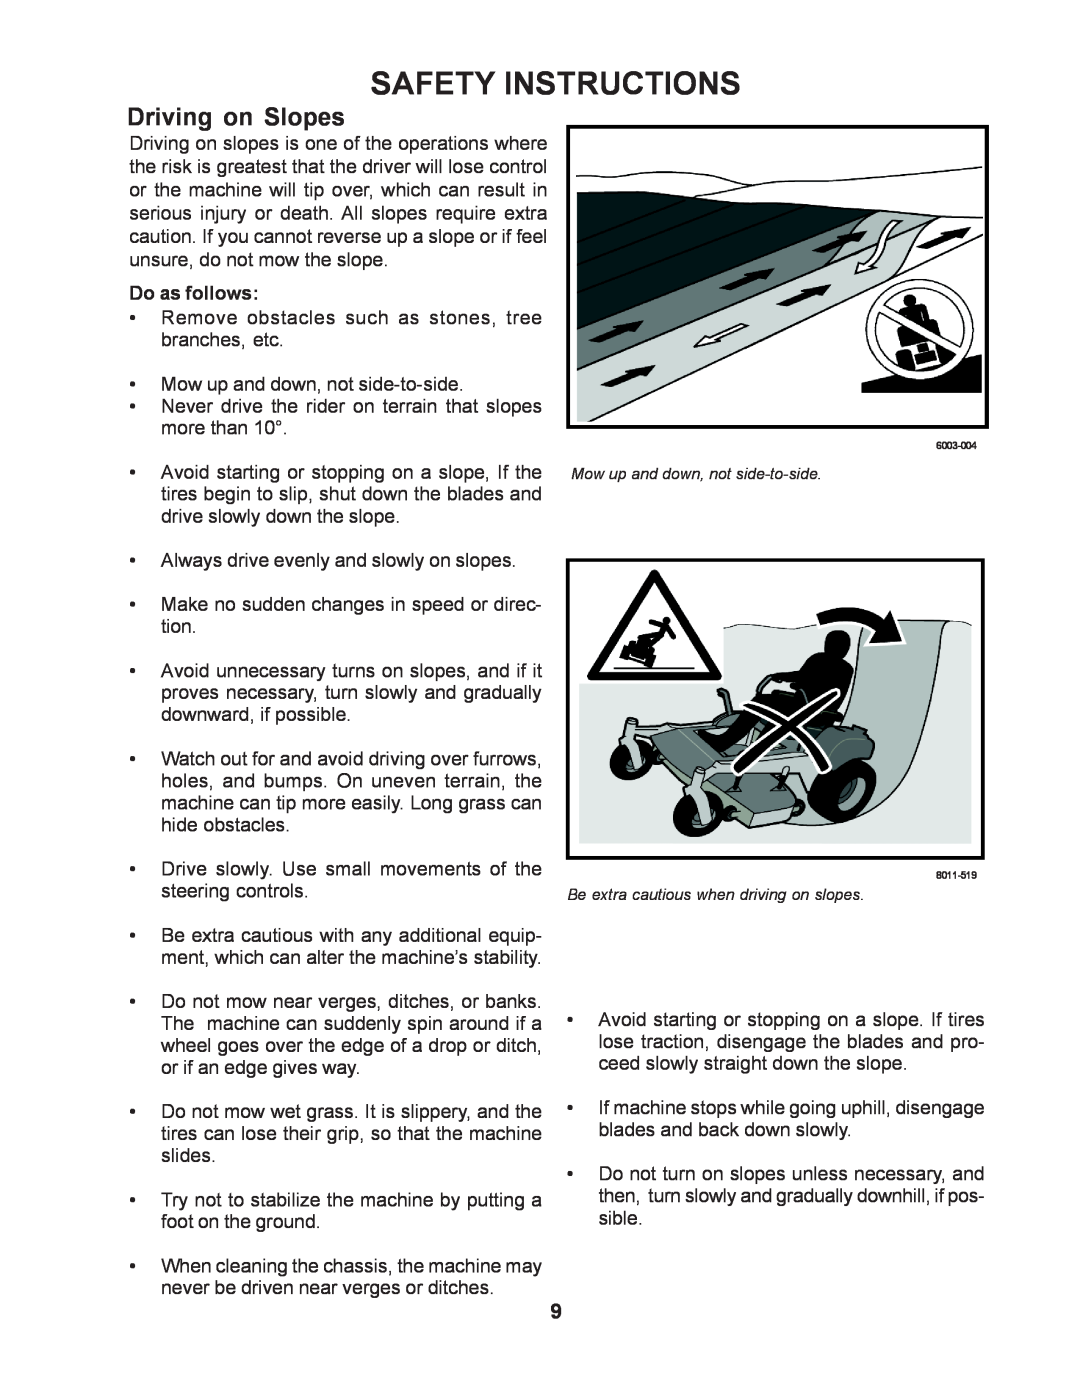 Yazoo/Kees ZMKH52251 / 968999532, ZMKW52211 / 968999466 manual Driving on Slopes, Do as follows, Safety Instructions 